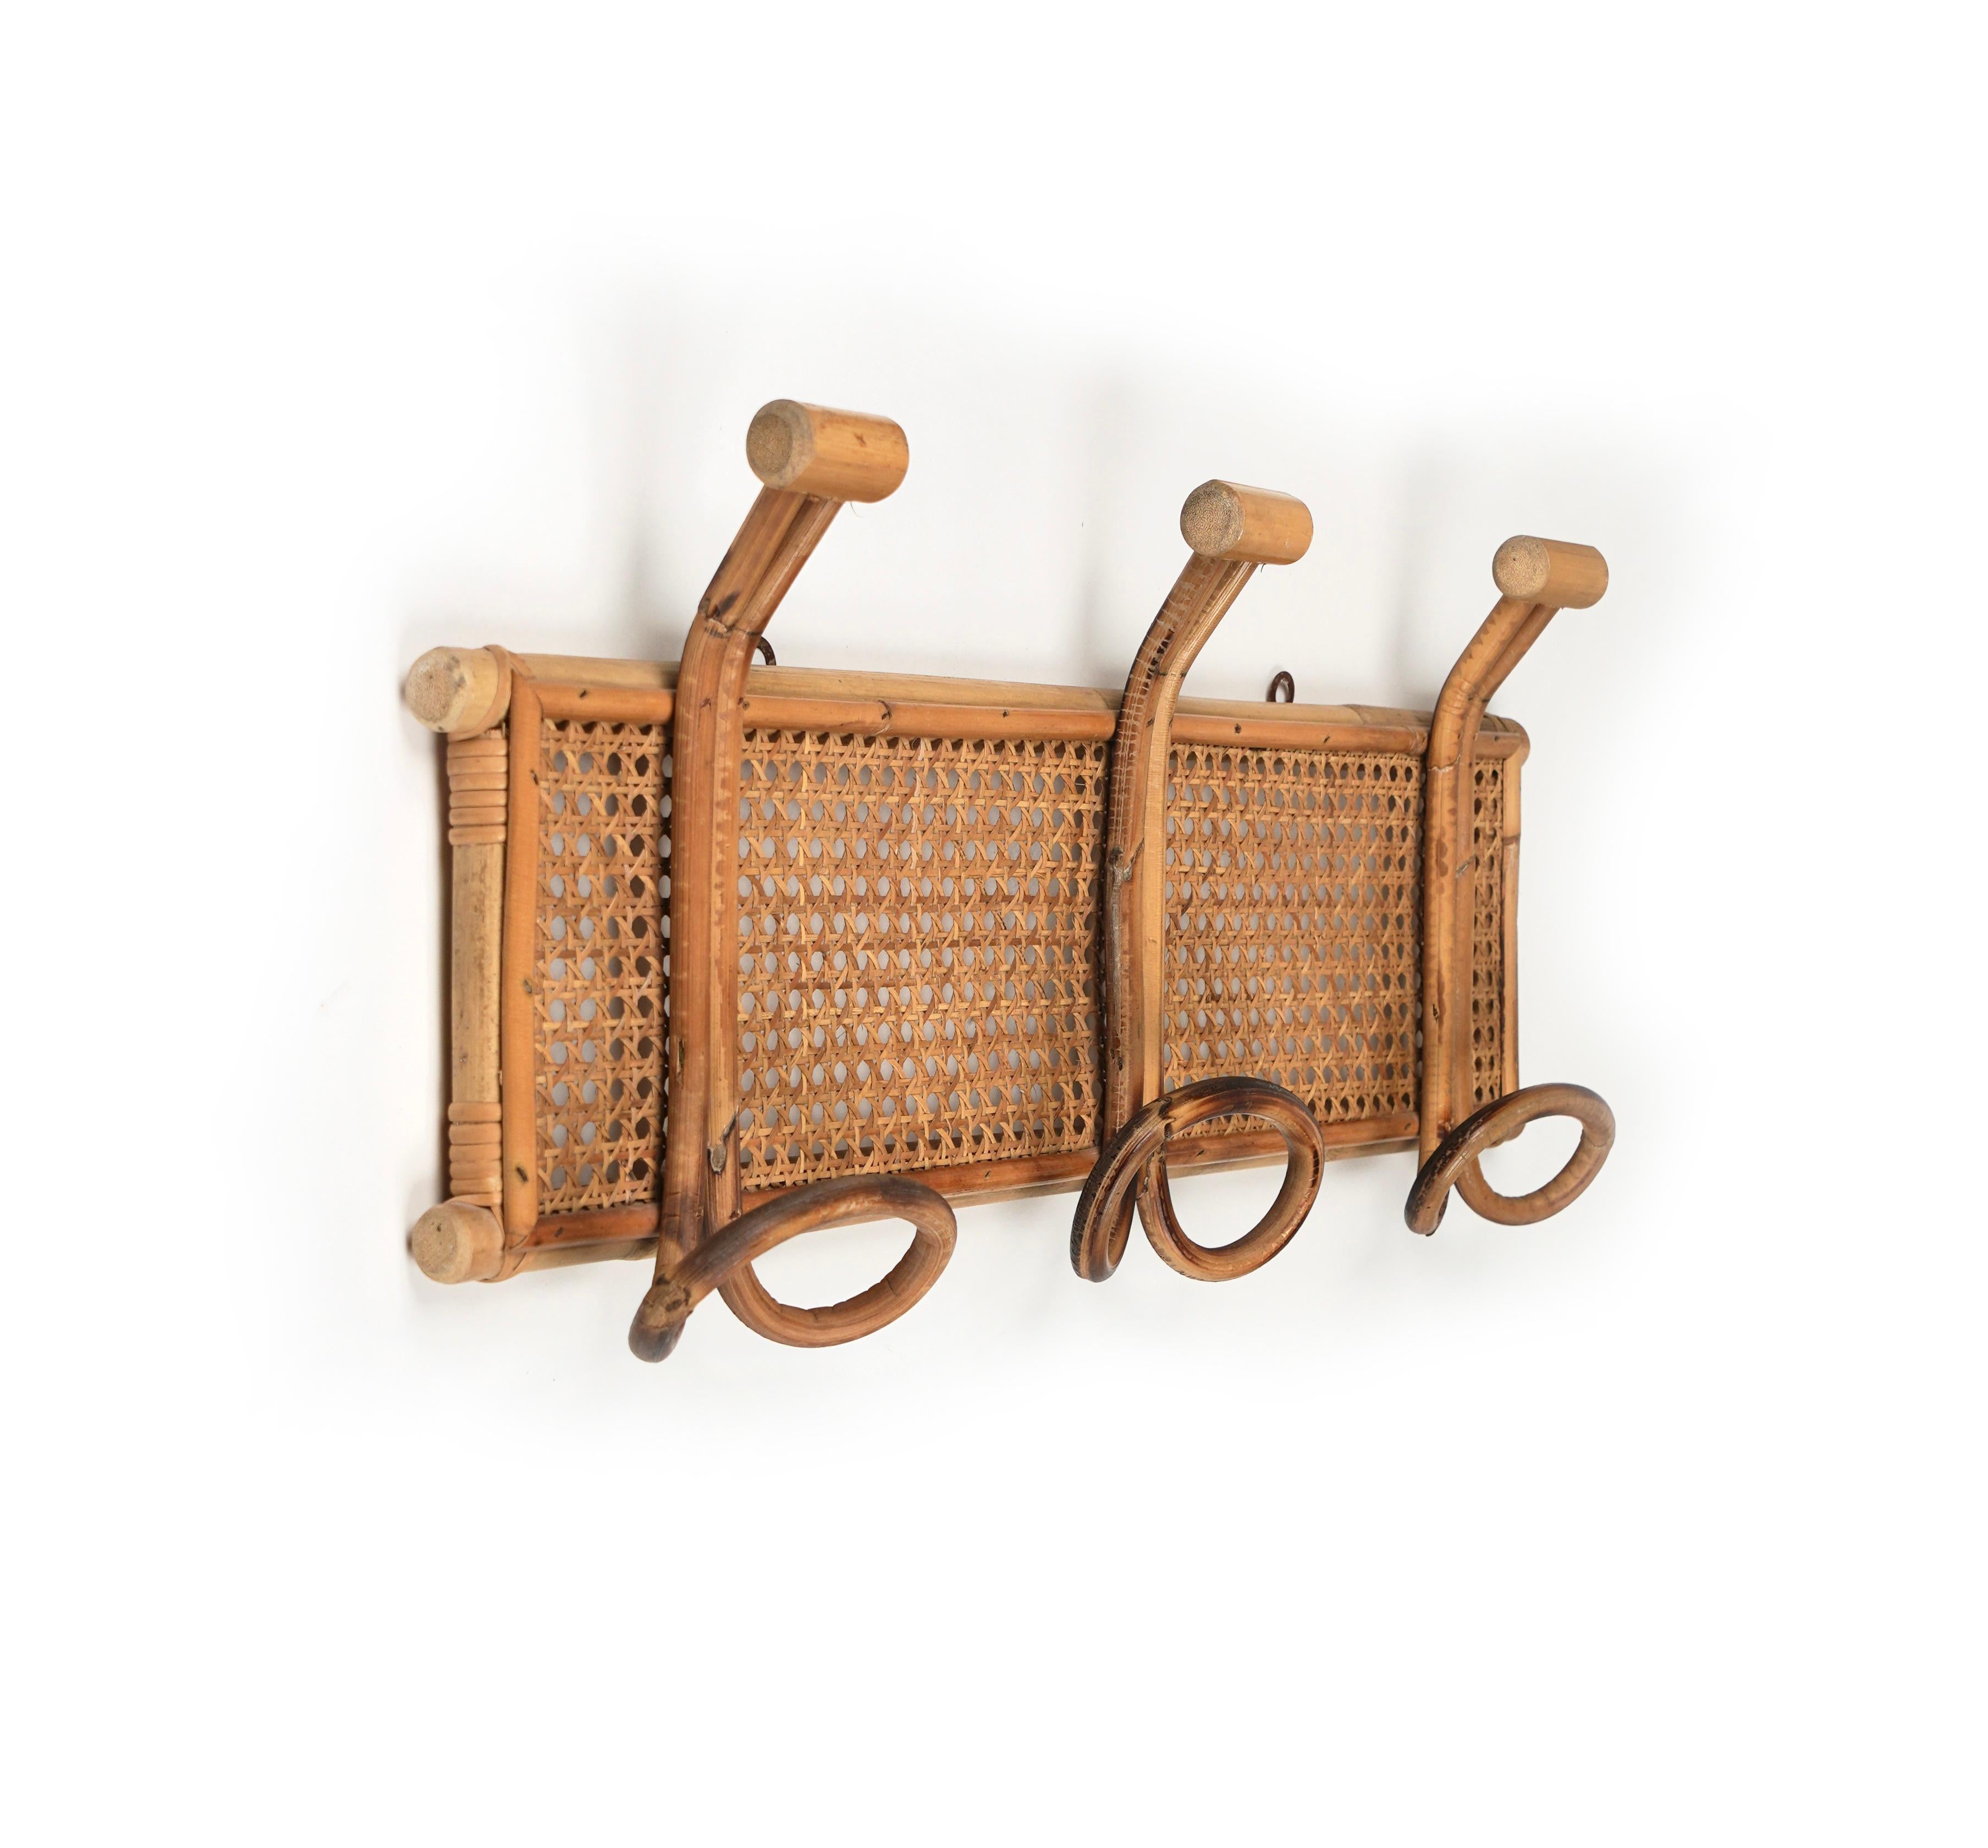 Midcentury coat rack stand in bamboo and rattan with three hooks. 

Made in Italy in the 1970s. 

The rattan material provides an easygoing chic, which flatters any interior.